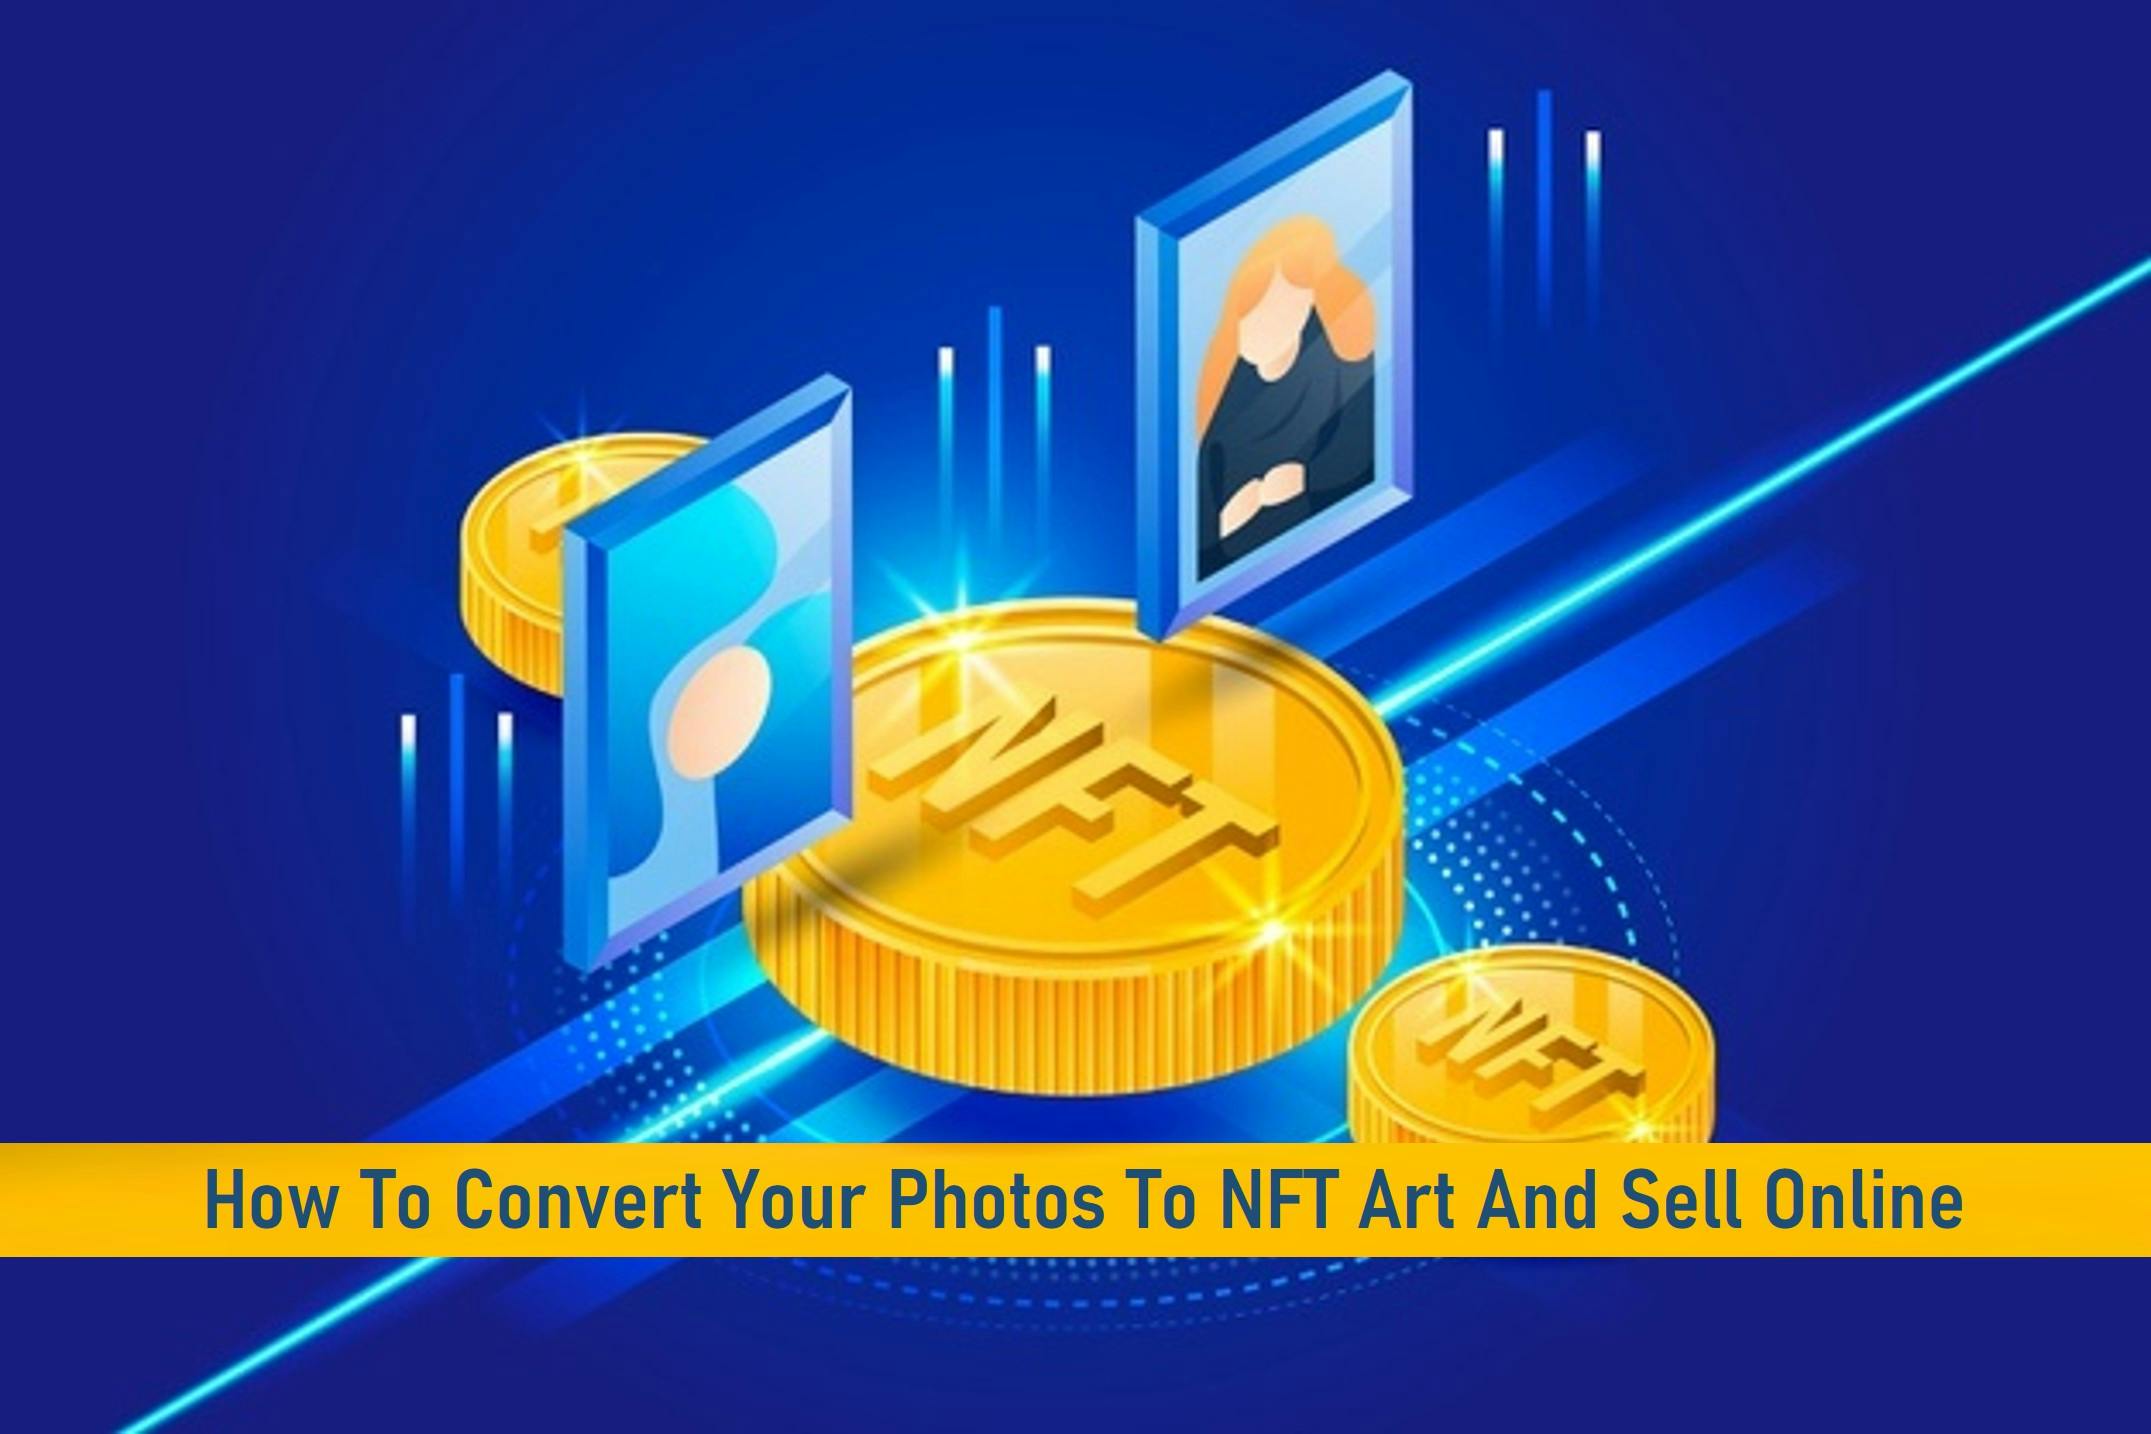 How To Convert Your Photos To NFT Art And Sell Online